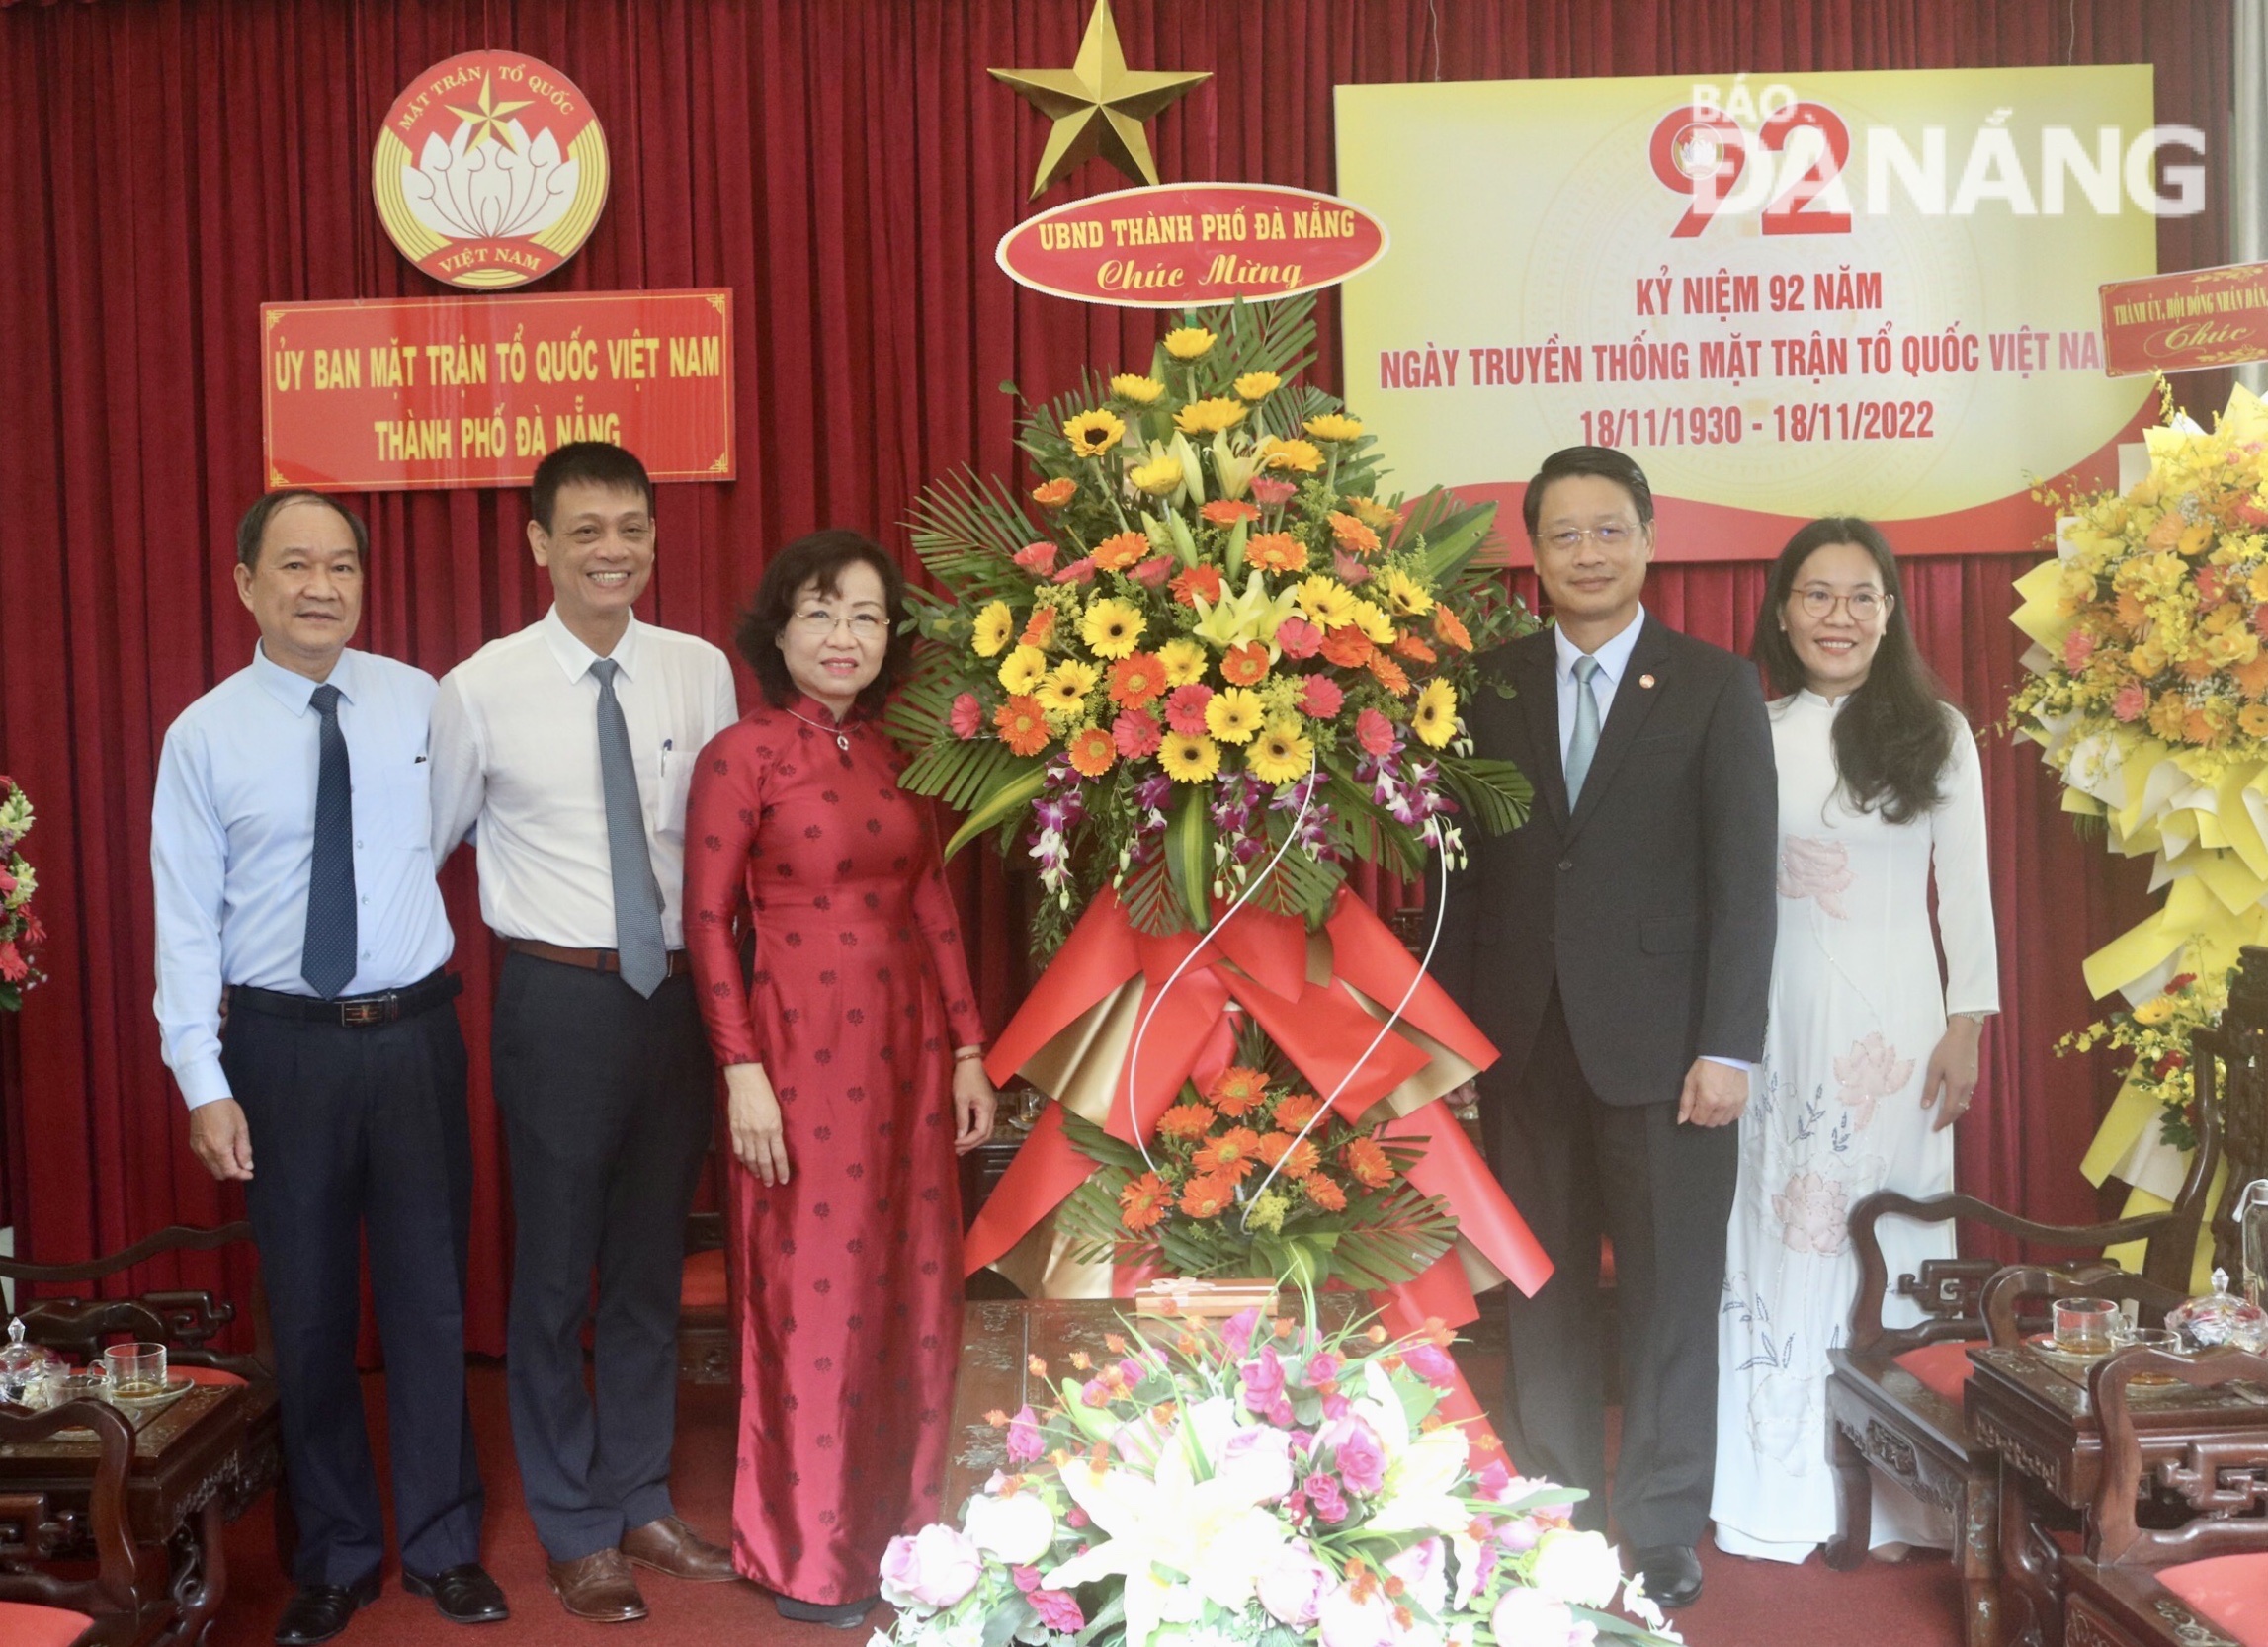 Da Nang People's Committee Vice Chairwoman Ngo Thi Kim Yen (third, left) presenting flowers to the city's Fatherland Front Committee on the occasion of the 92nd anniversary of Traditional Day of Viet Nam Fatherland Front